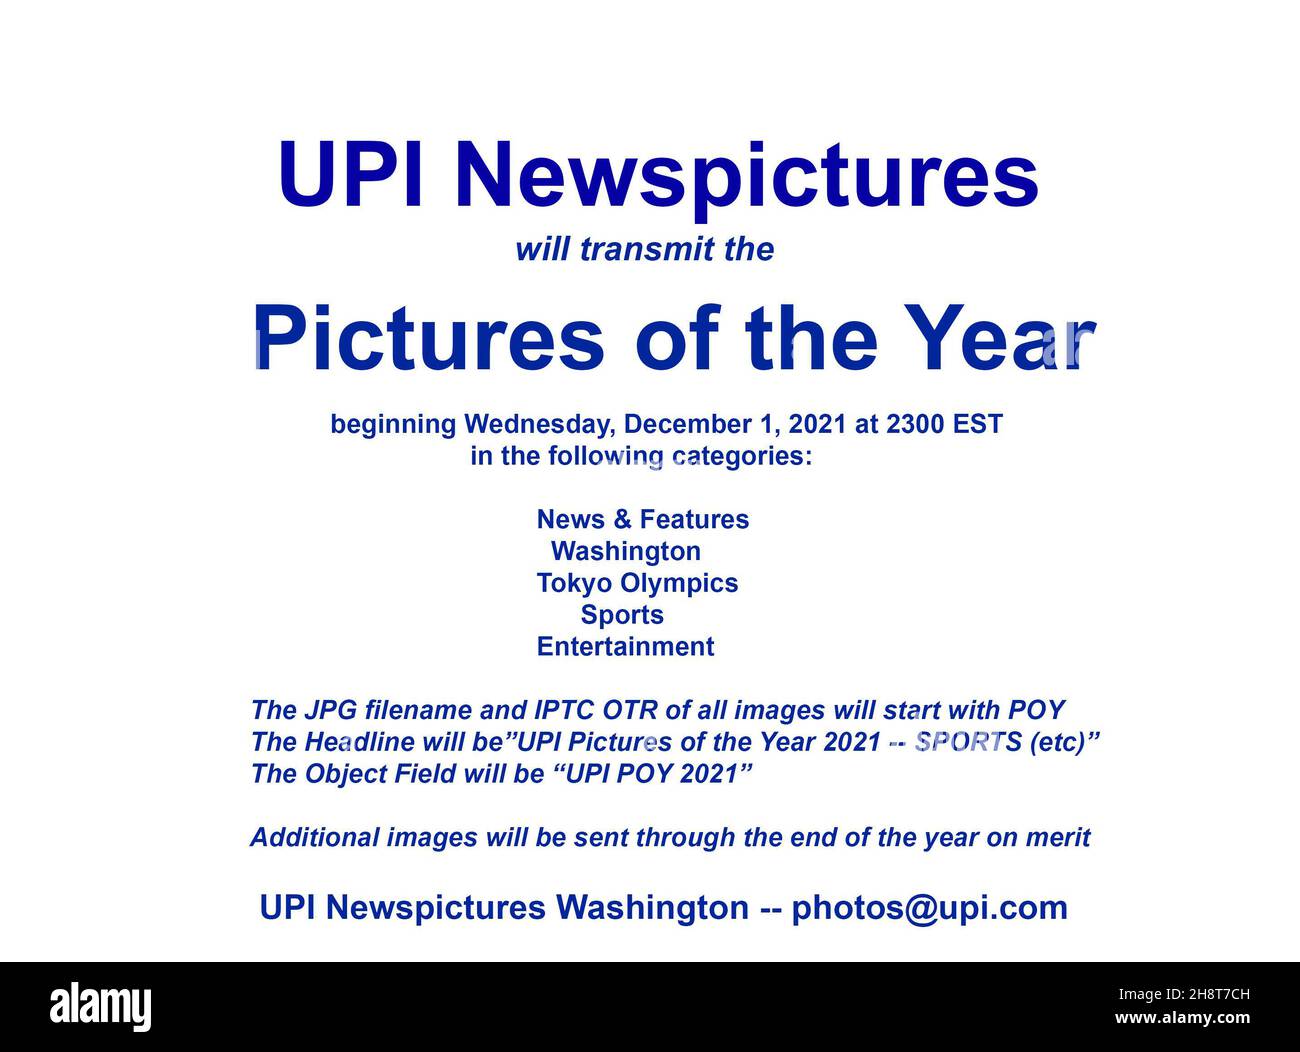 Washington, United States. 02nd Dec, 2021. UPI Newspictures will transmit 2021 Pictures of the Year on Wednesday, December 1, 2017, at approximately 2300 EST (0400GMT, Dec 2nd) in the following categories: News & Features, Washington, Tokyo Olympics, Sports, and Entertainment. The JPG filename and IPTC OTR of all images will start with POY. The Headline will be 'UPI Pictures of the Year 2021 - Sports (and so on). The Object Field will be 'UPI POY 2021'. Additional POY images will be transmitted through the end of the year on merit. Credit: UPI/Alamy Live News Stock Photo